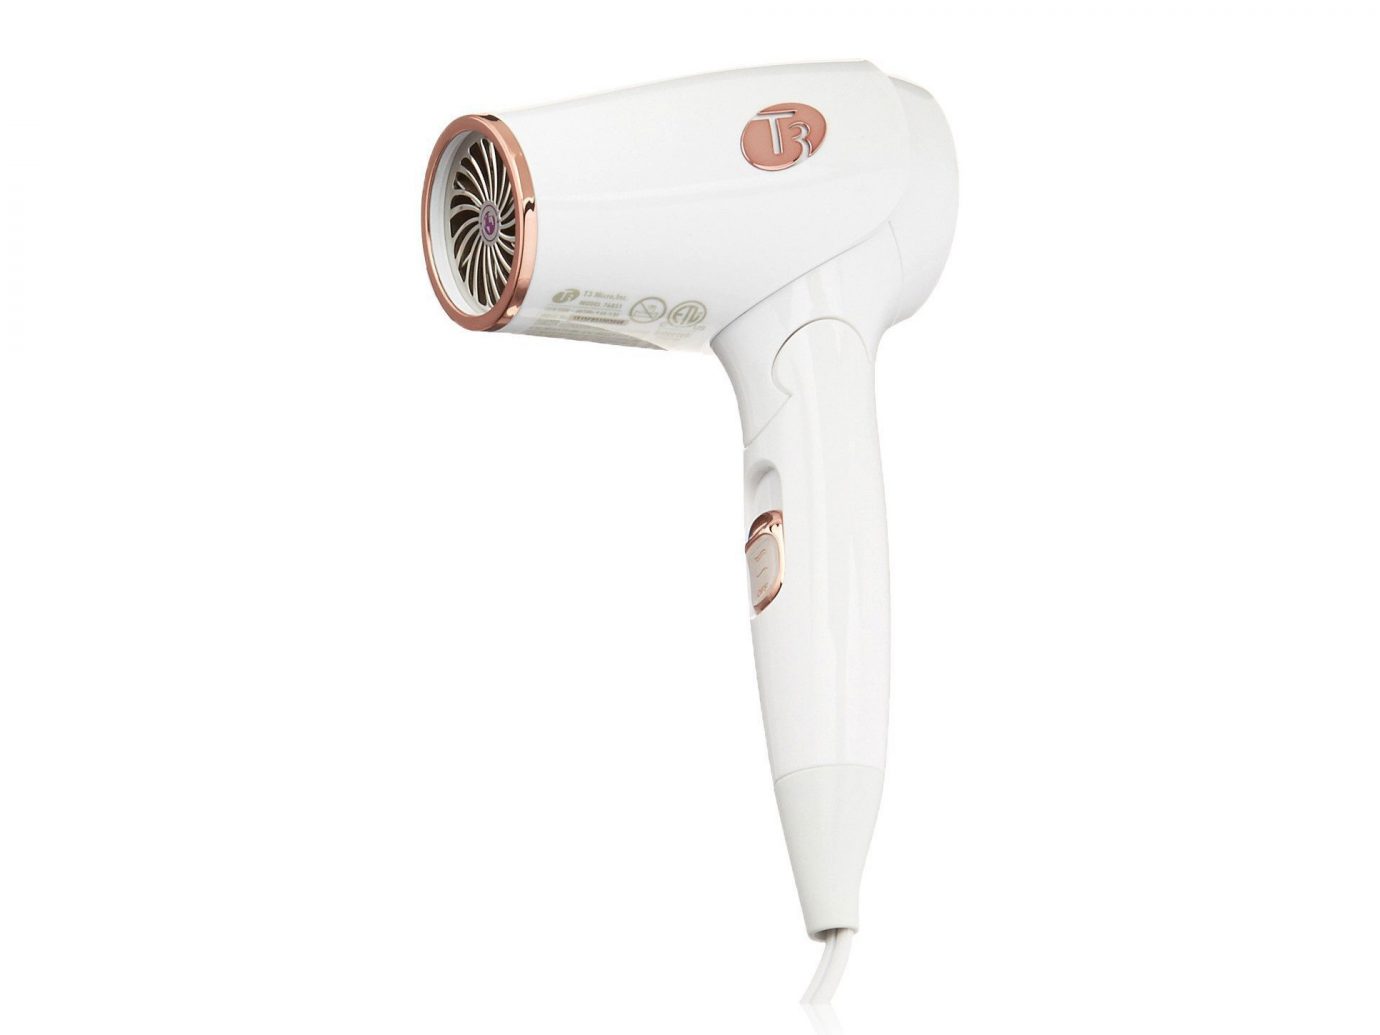 Style + Design appliance dryer hair dryer product home appliance